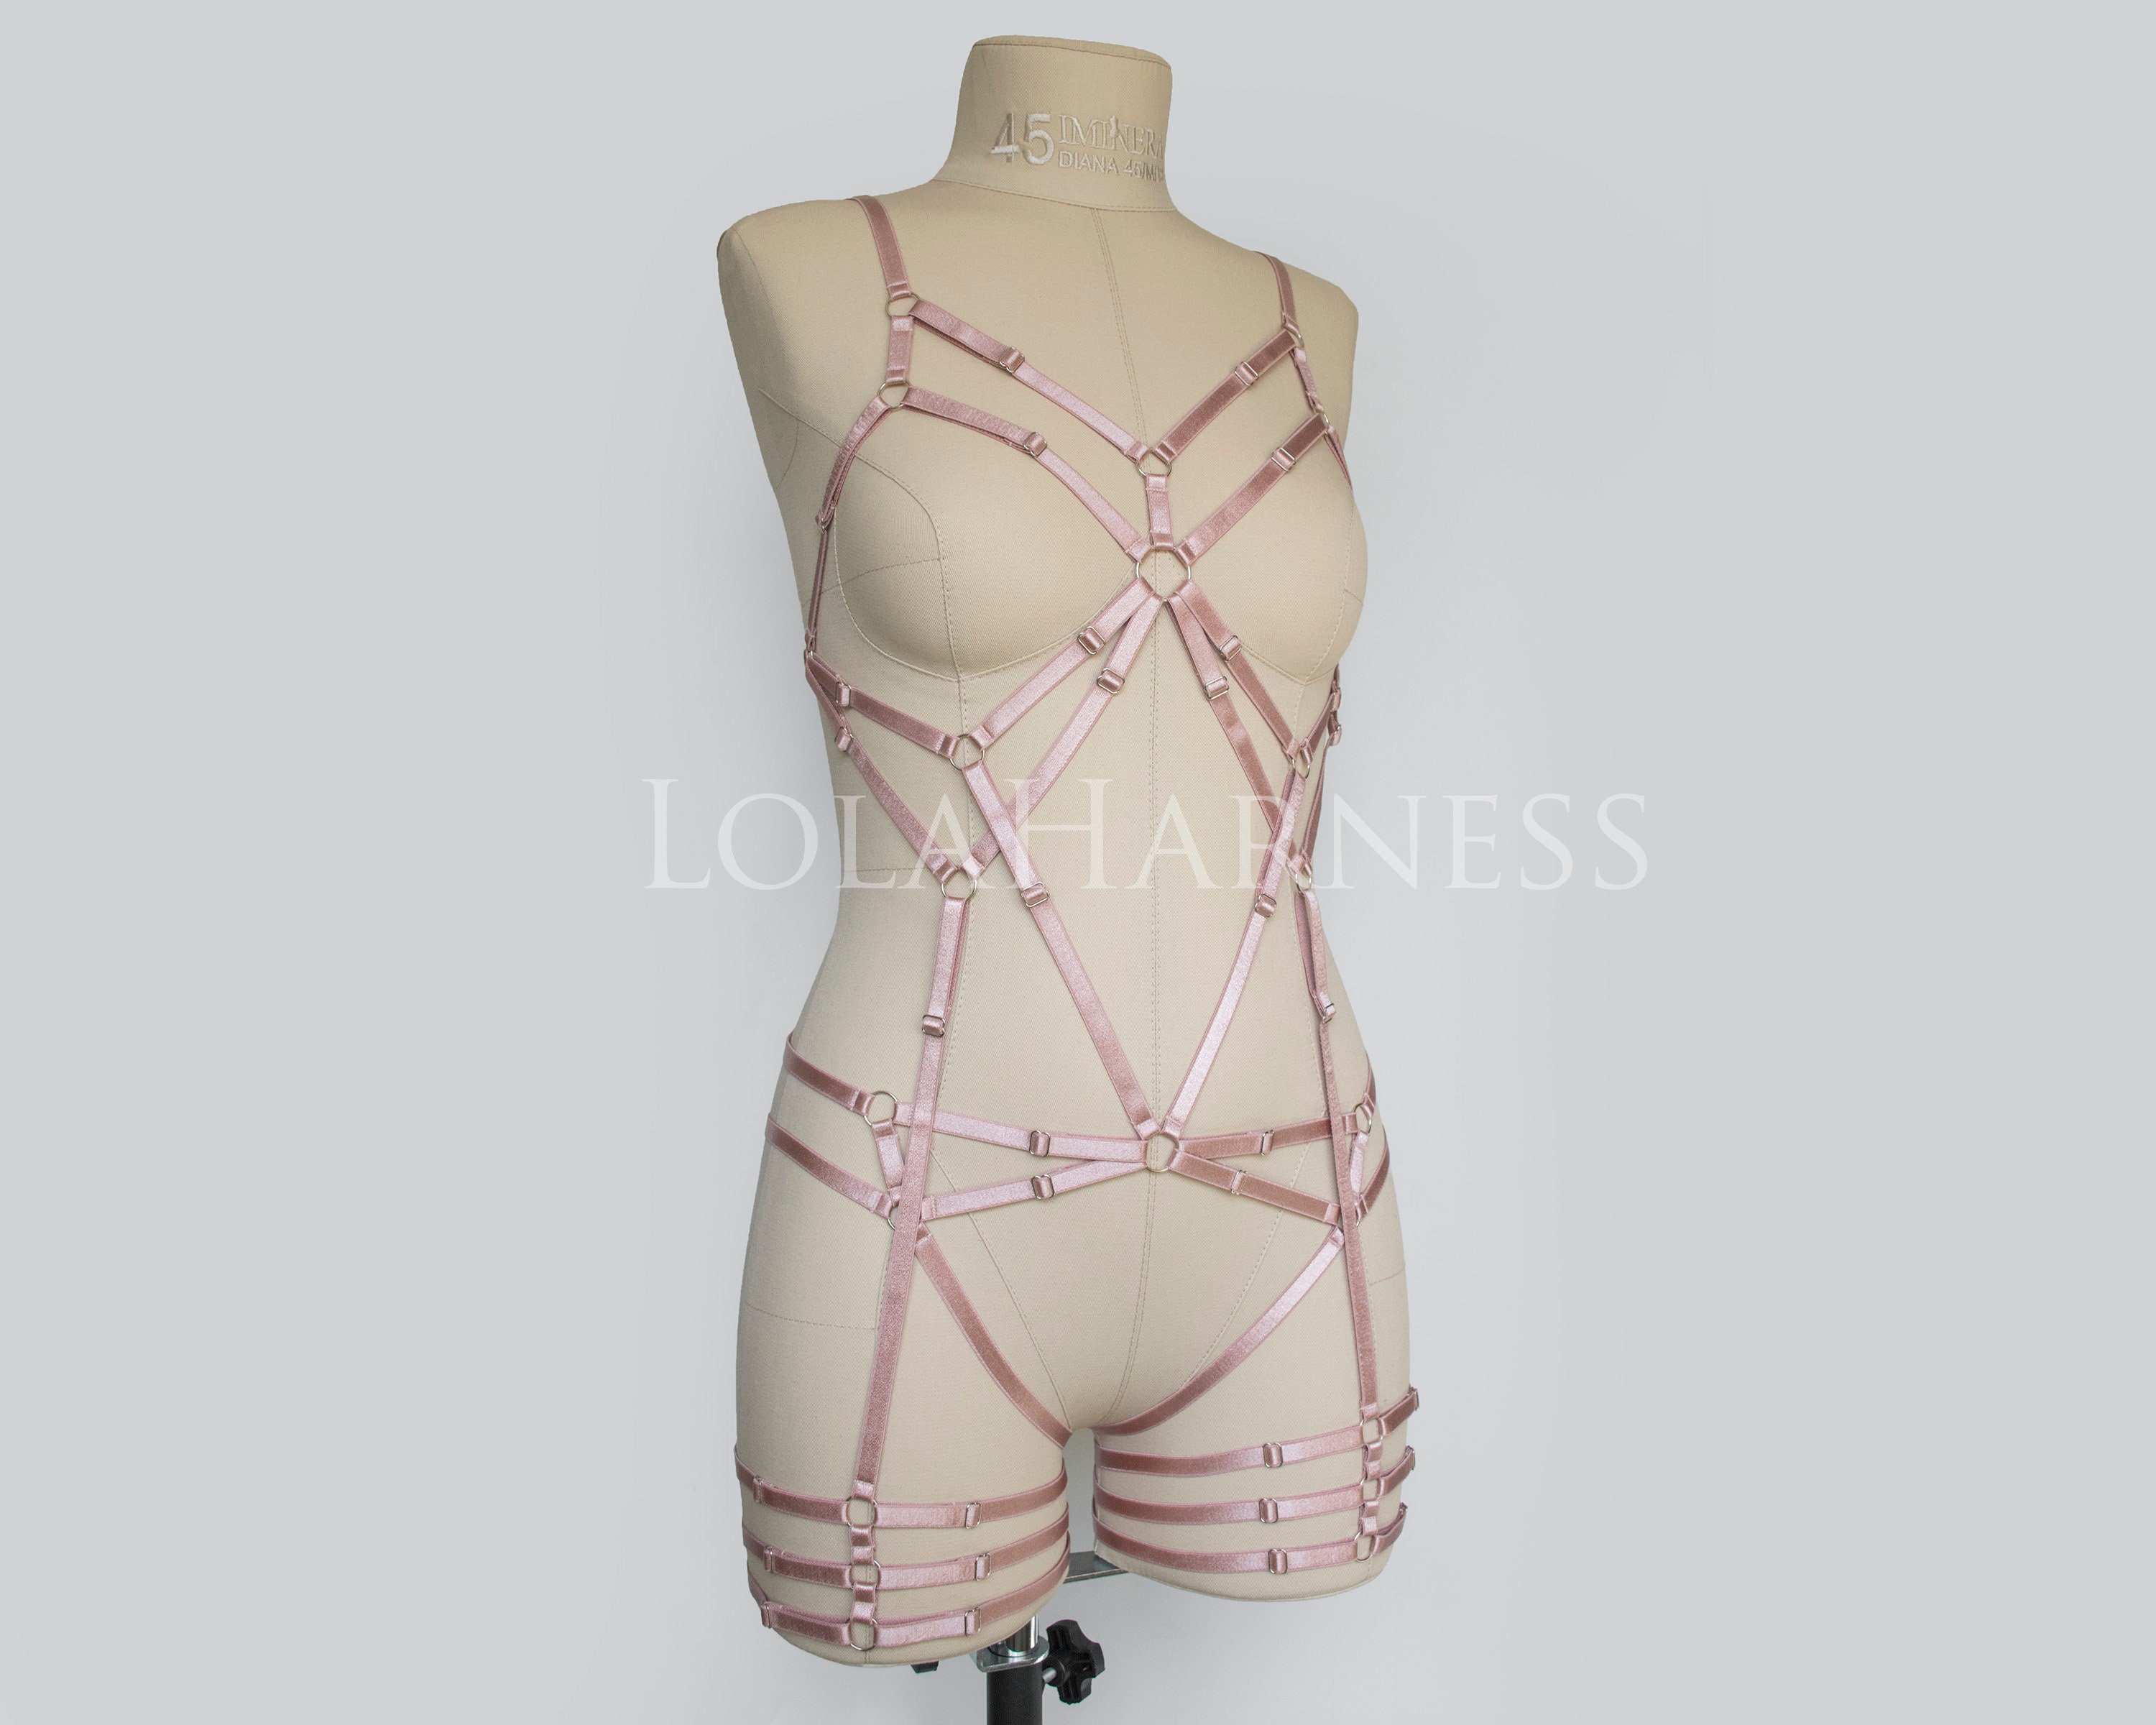 The Candy Two Piece Harness Set / Crotchless Bottoms / Open Bra